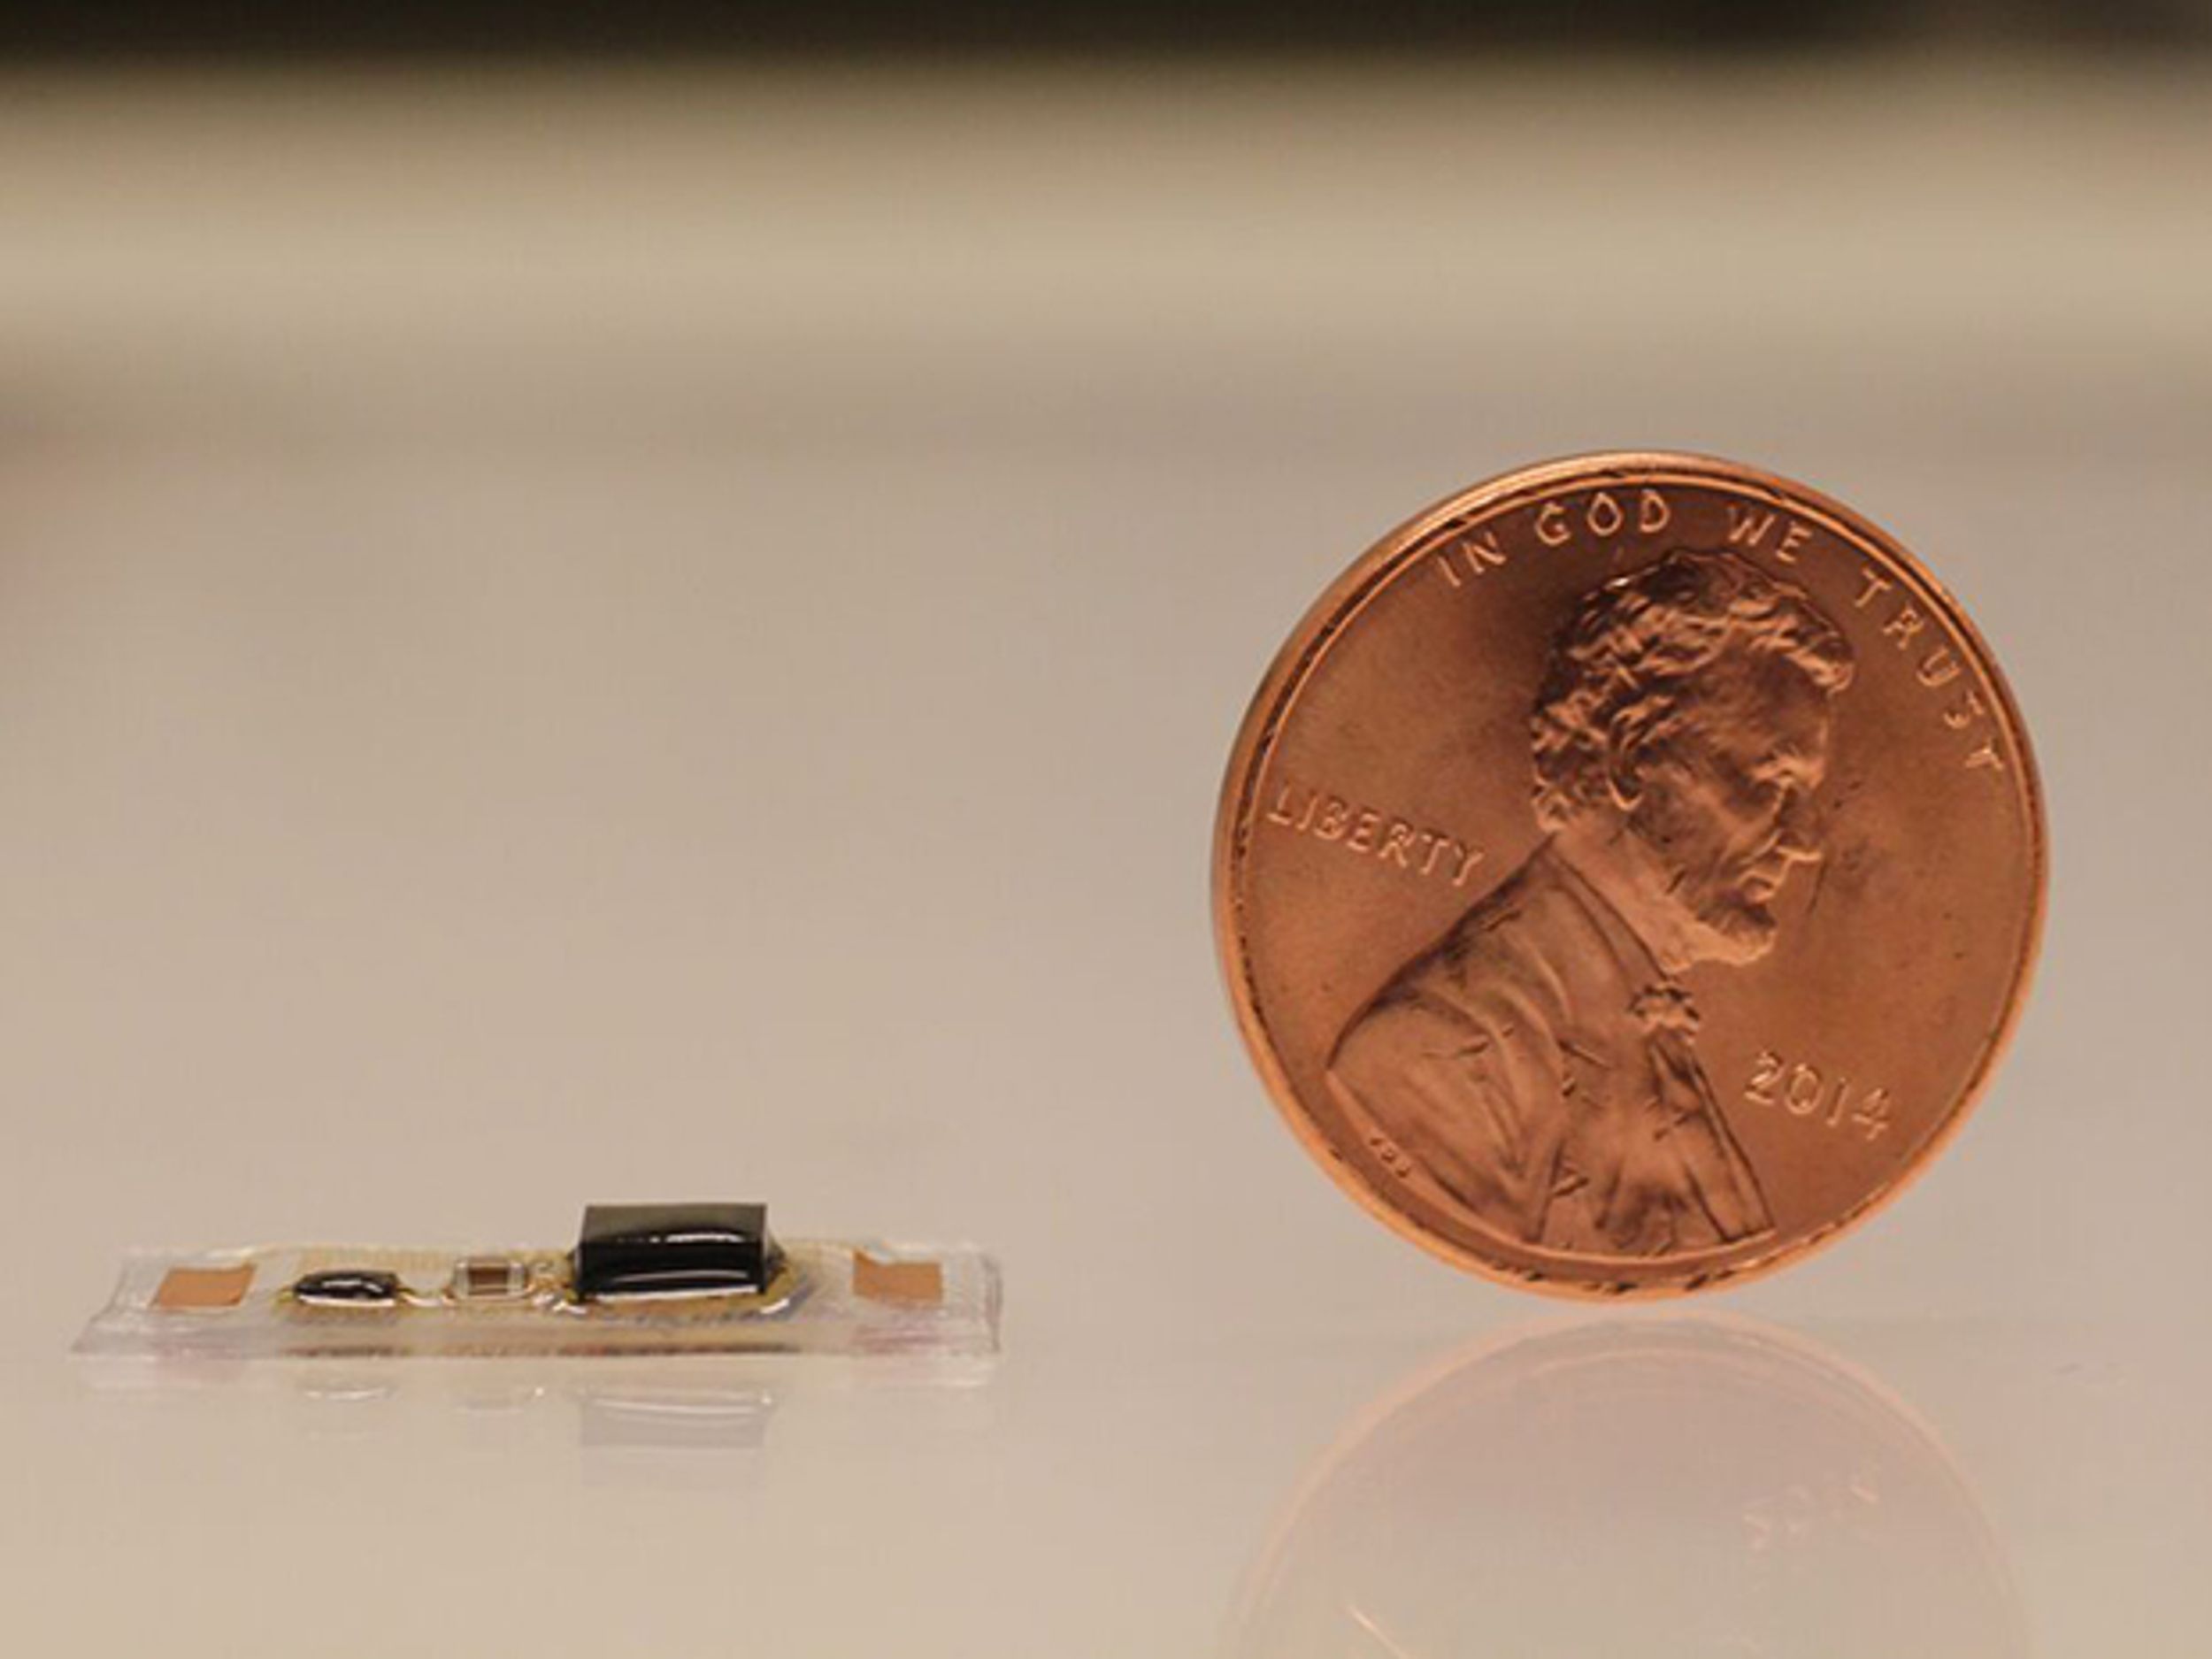 A tiny, wearable acoustic sensor developed by researchers can be used to monitor heart health and recognize spoken words.